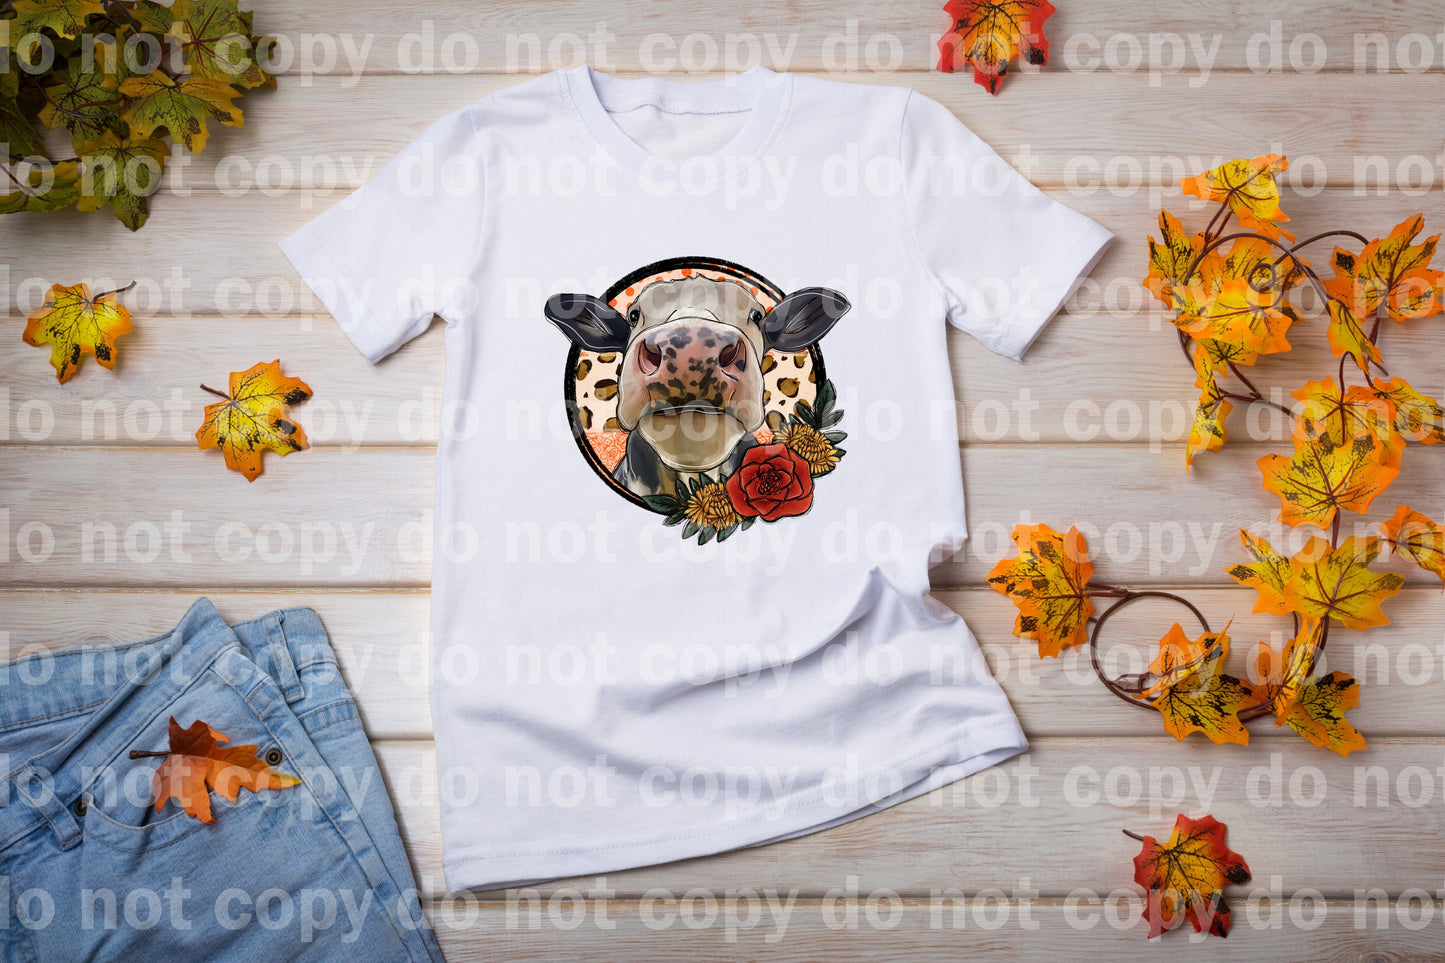 Fall Cow Dream Print or Sublimation Print